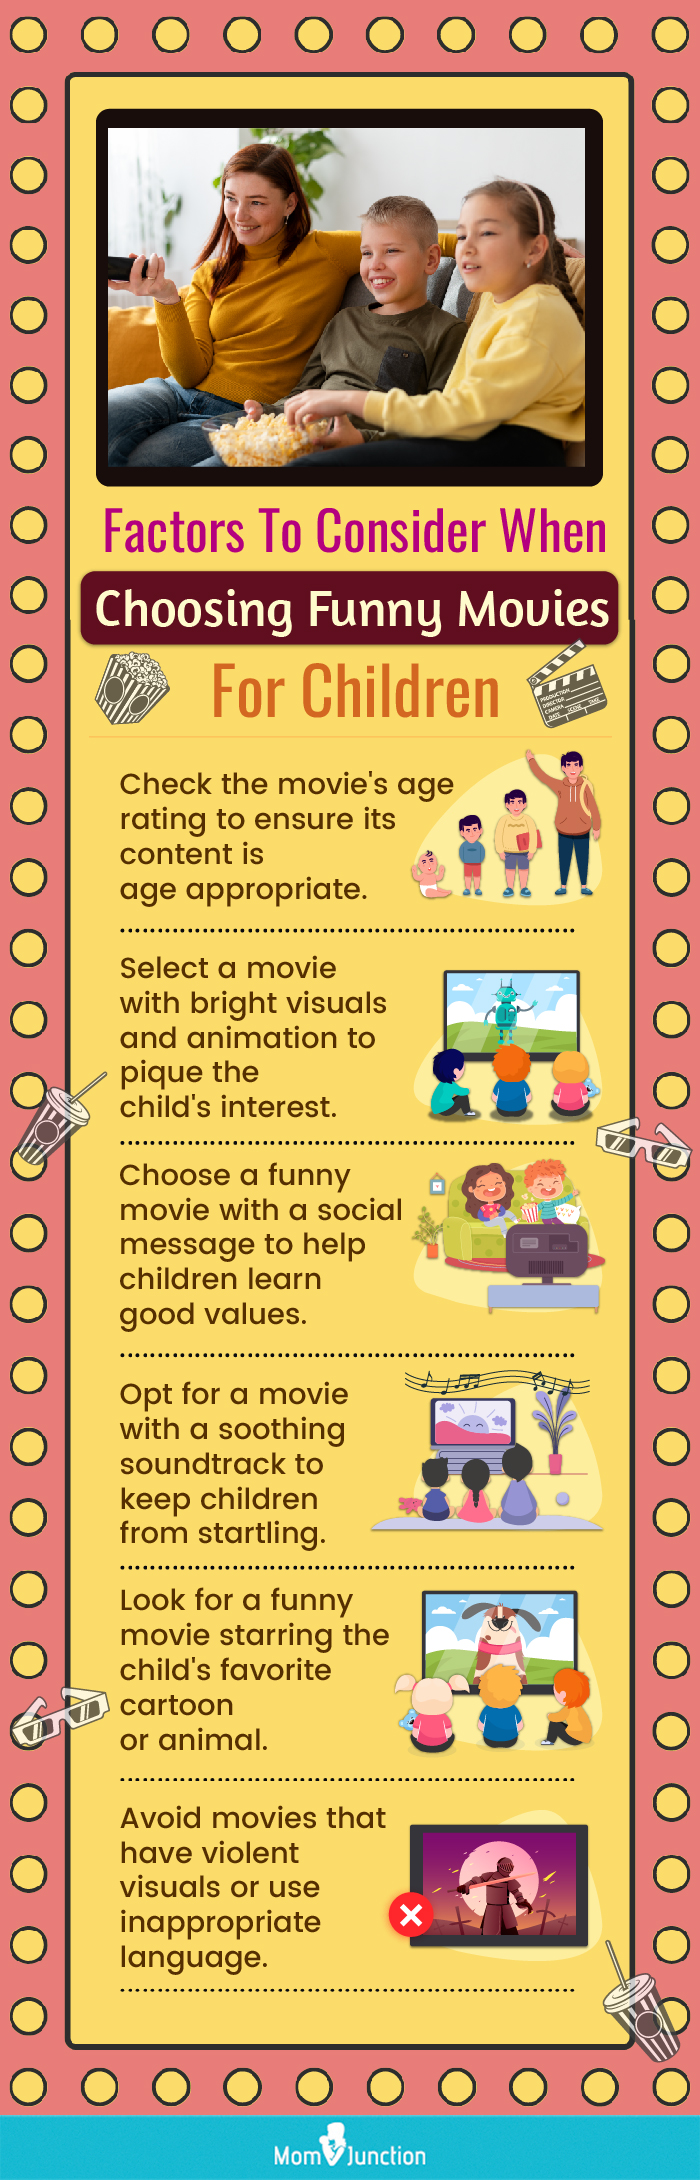 Factors To Consider When Choosing Funny Movies For Children (infographic)